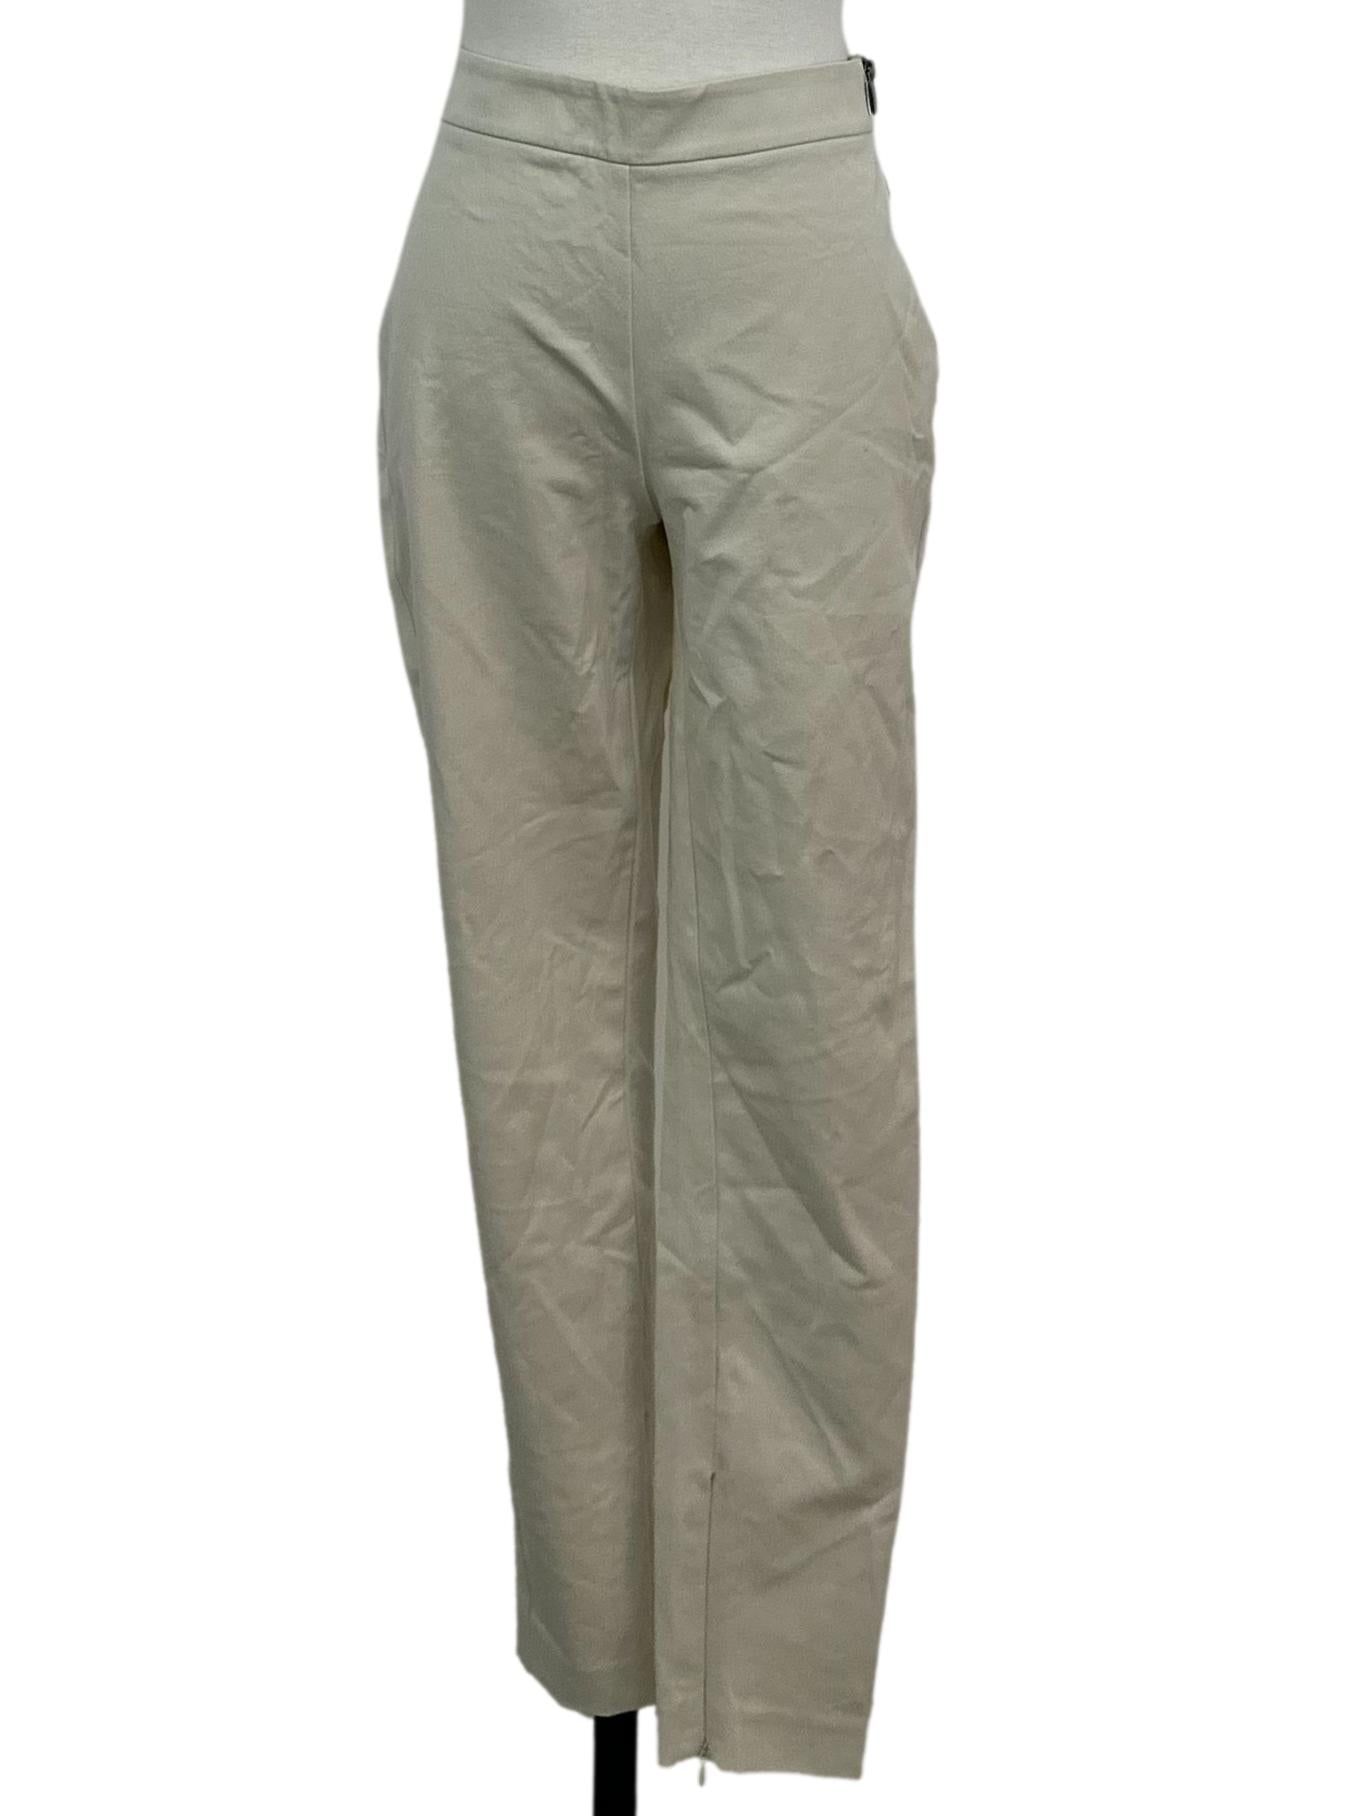 Assorted Brands Ivory Formal Pants, Women's Fashion, Muslimah Fashion,  Bottoms on Carousell